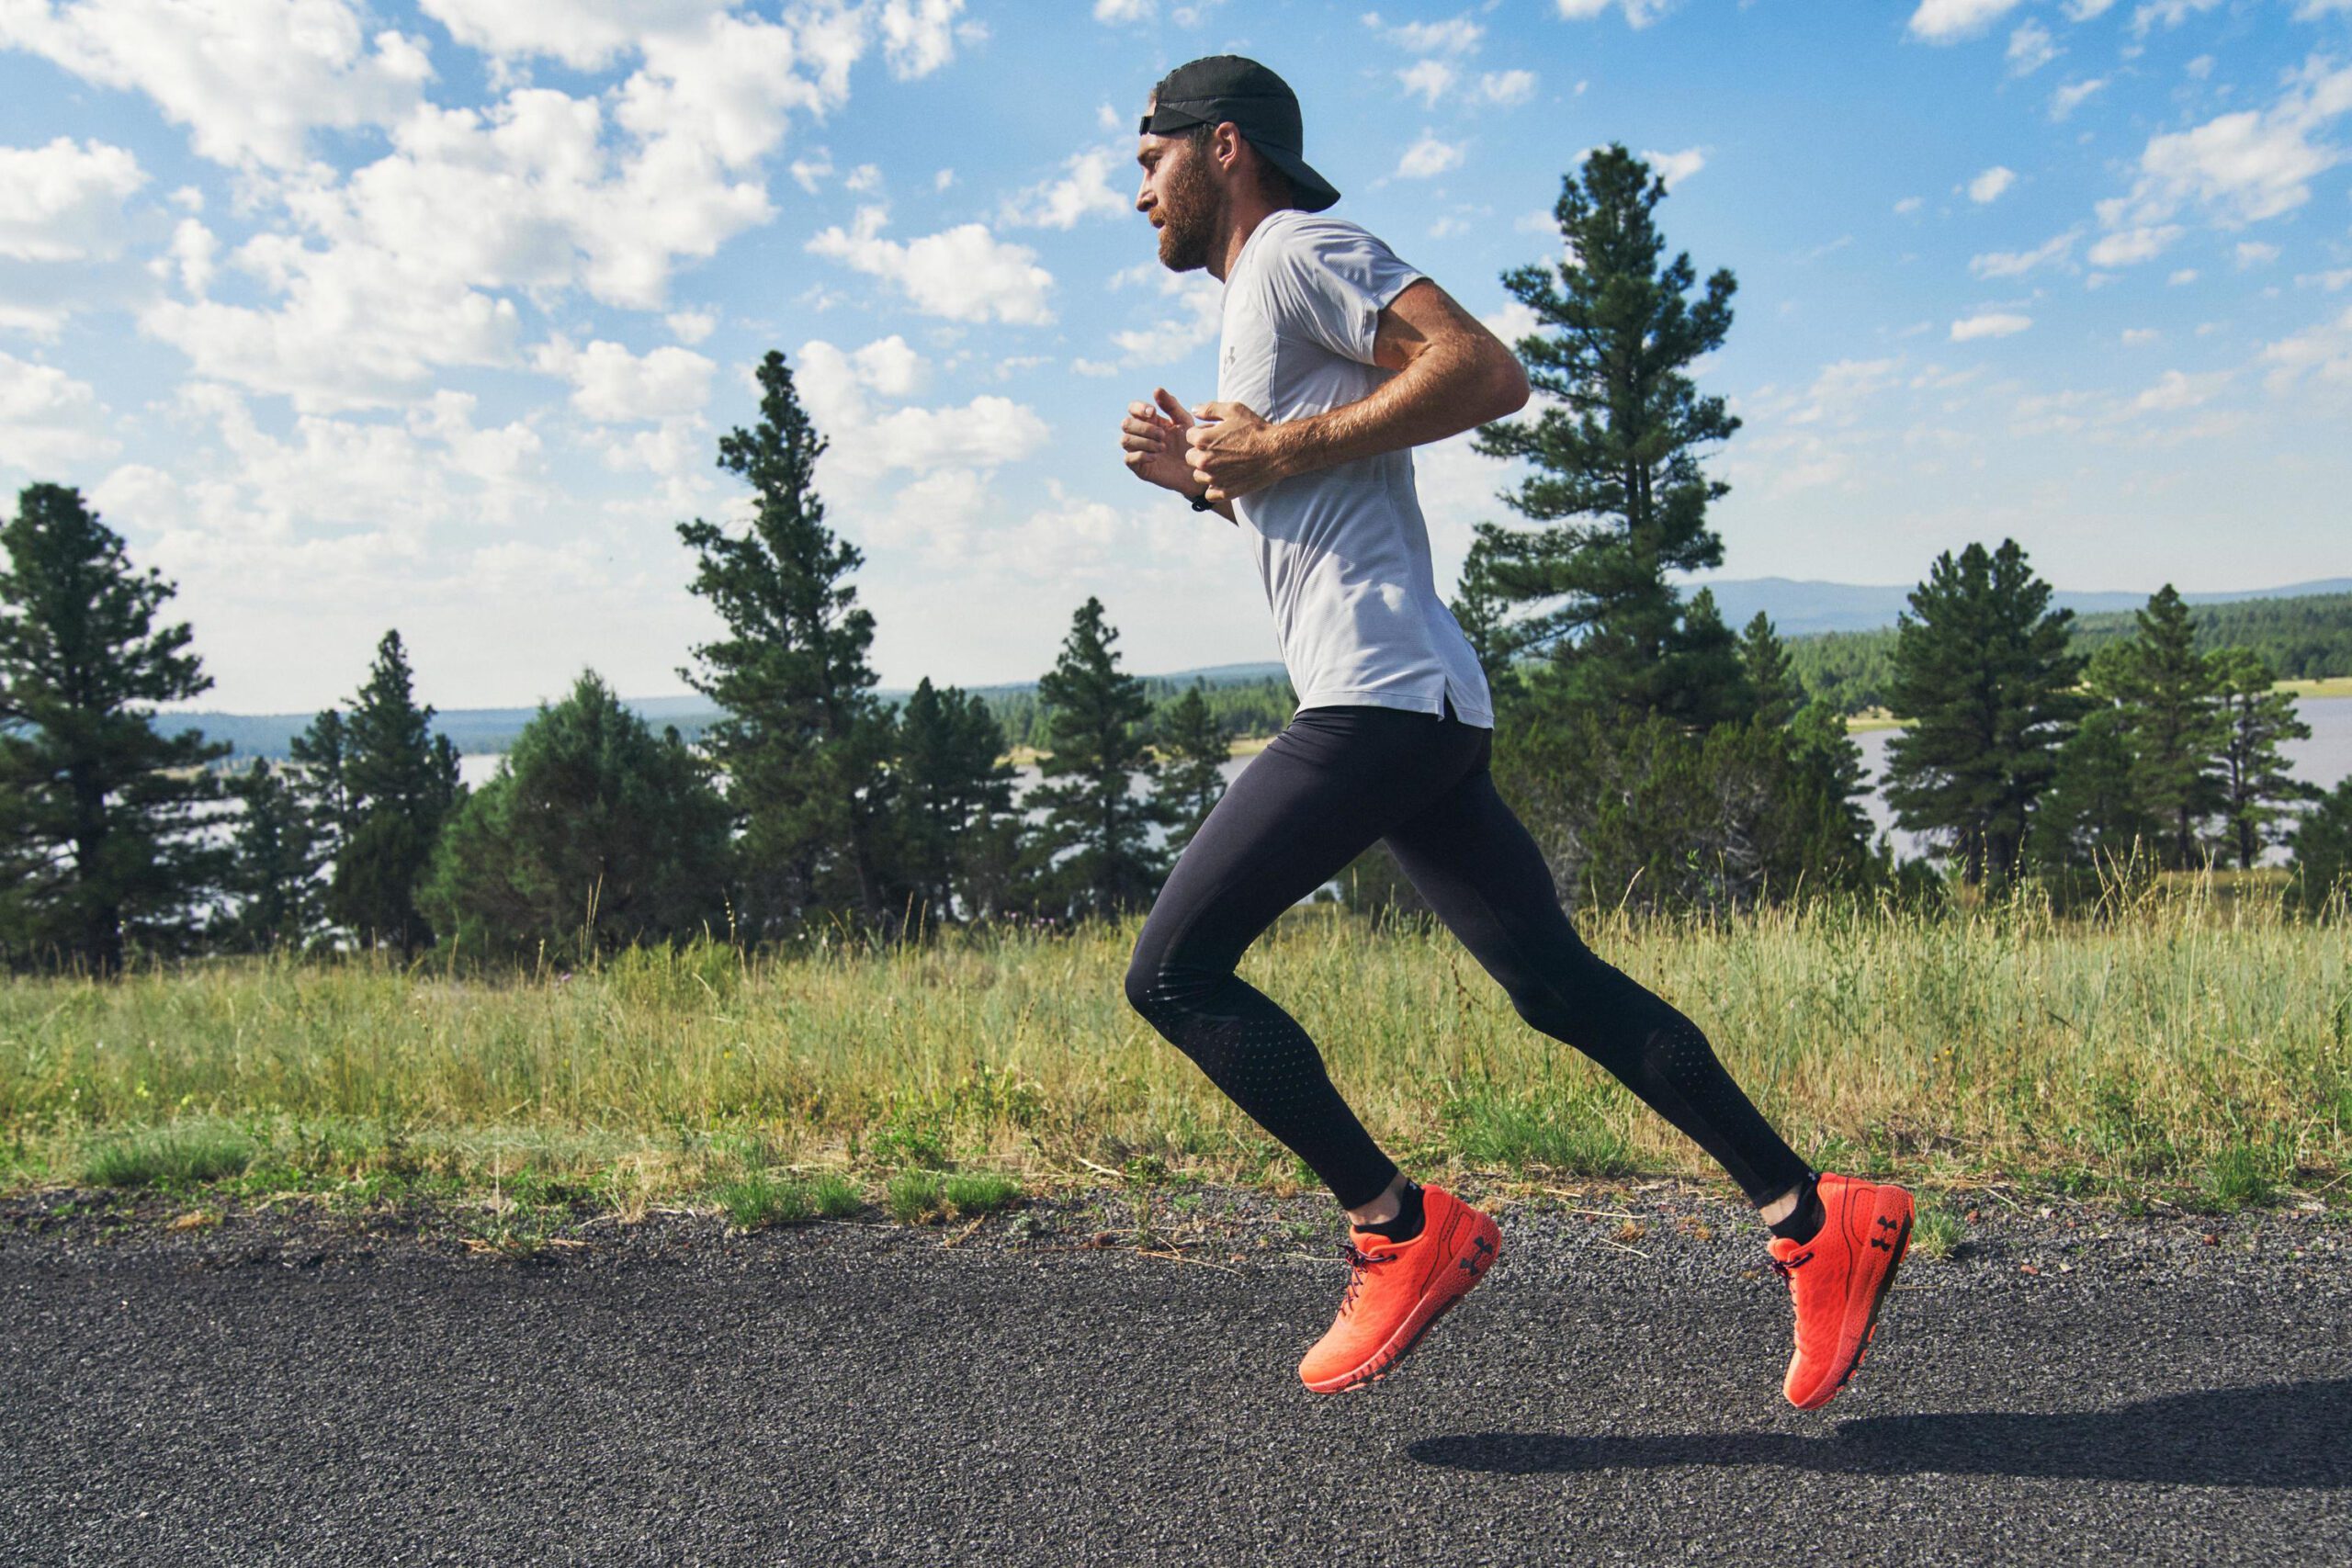 The Best Running Clothes For Hot Weather